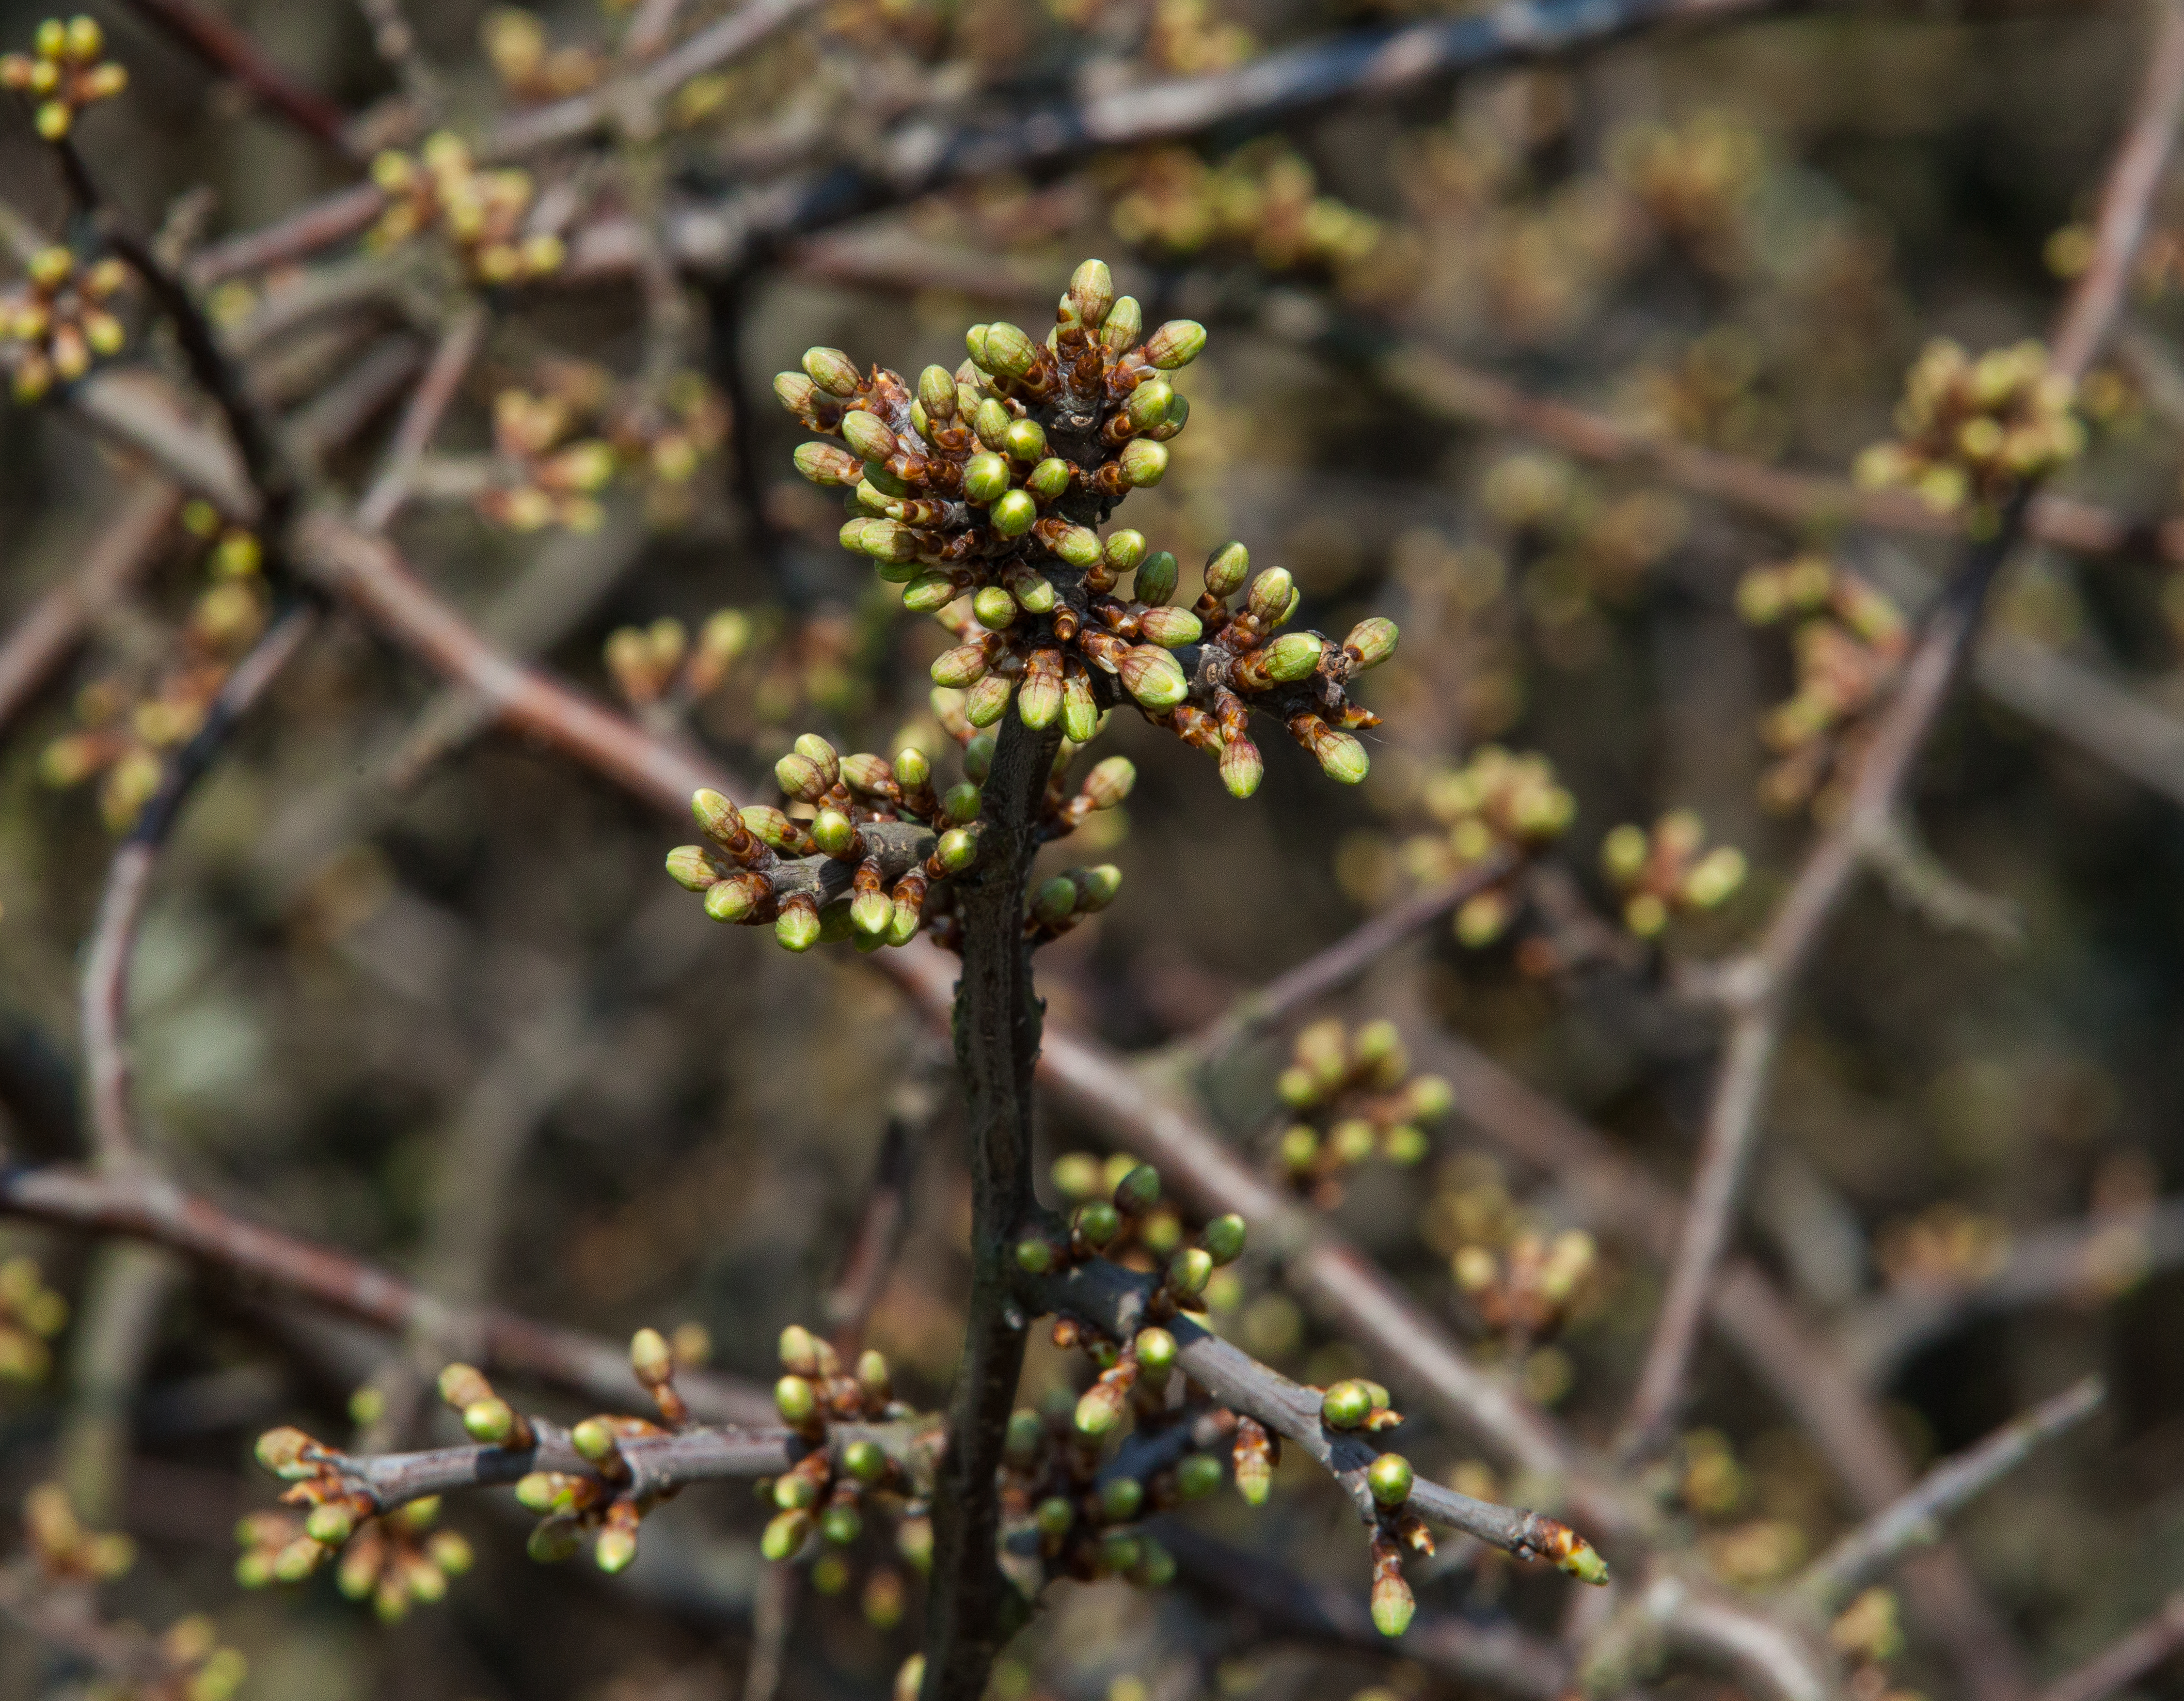 young leaves to be sprung from the buds soon in Lviv region of Ukraine in March 2014